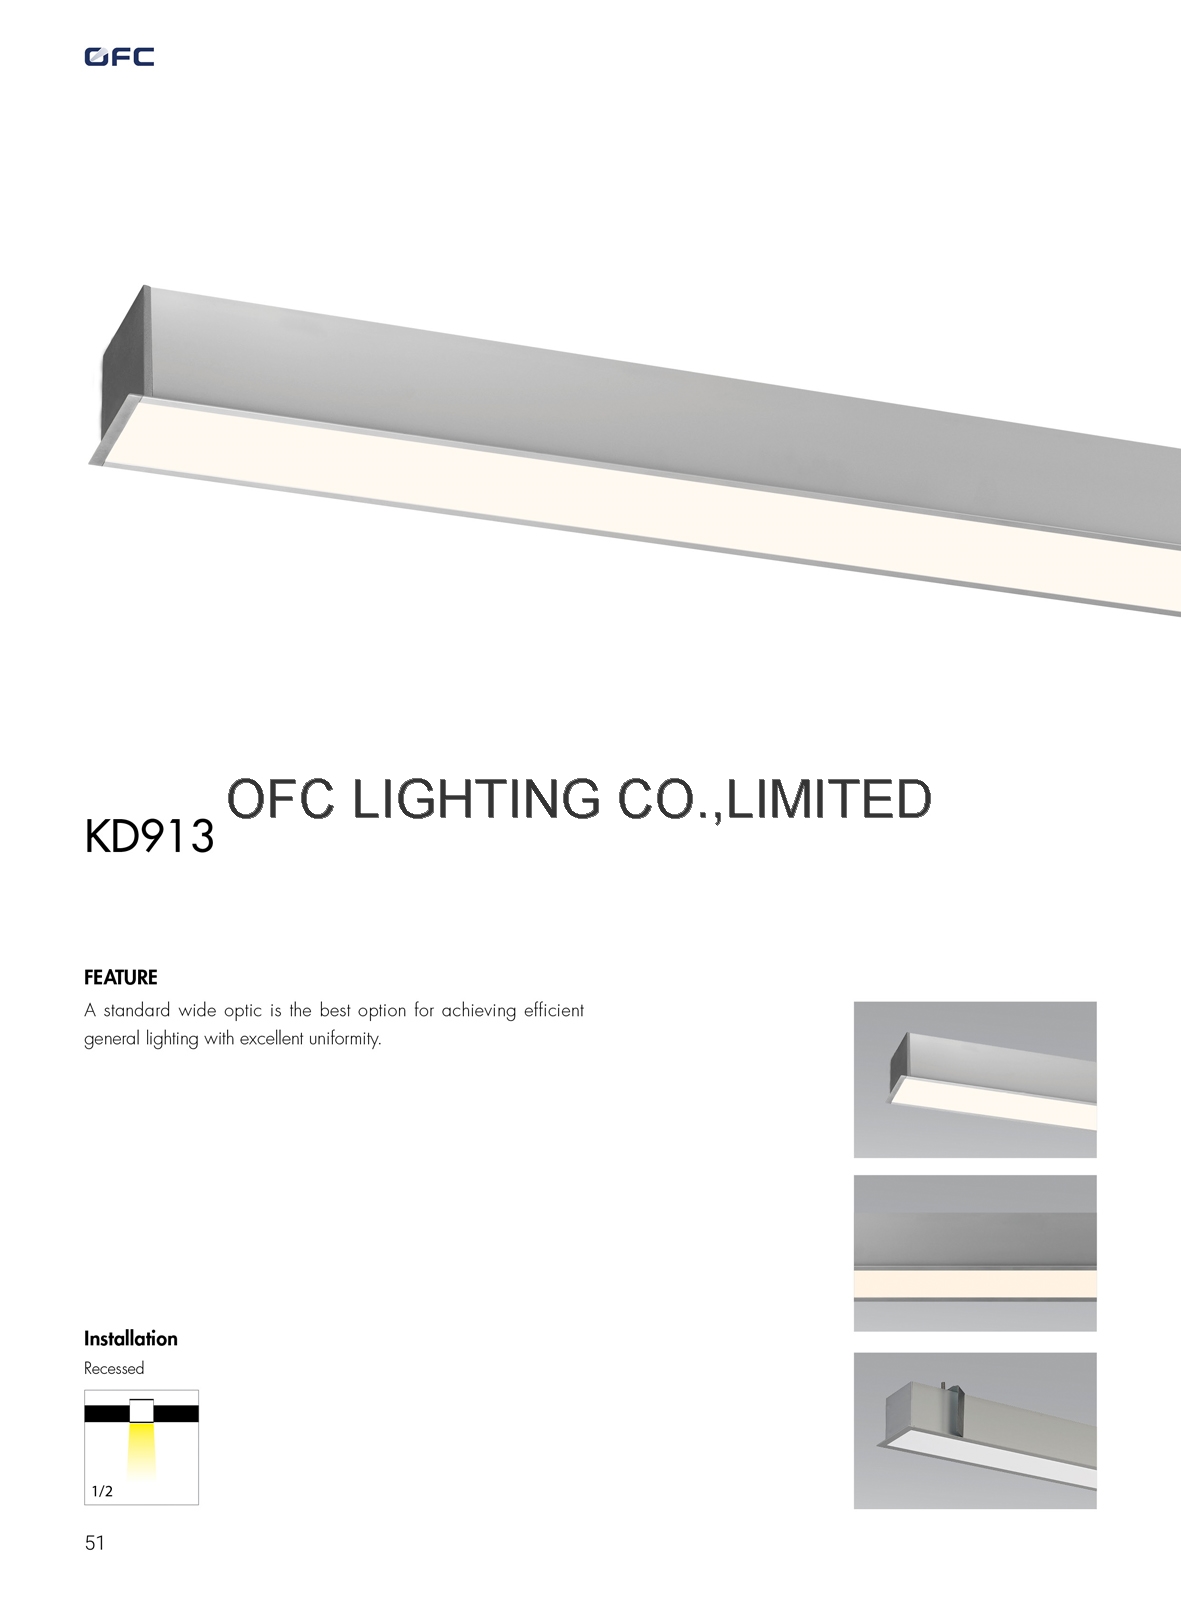 OFC KD913 Aluminum body commercial electric led daylight recessed lighting